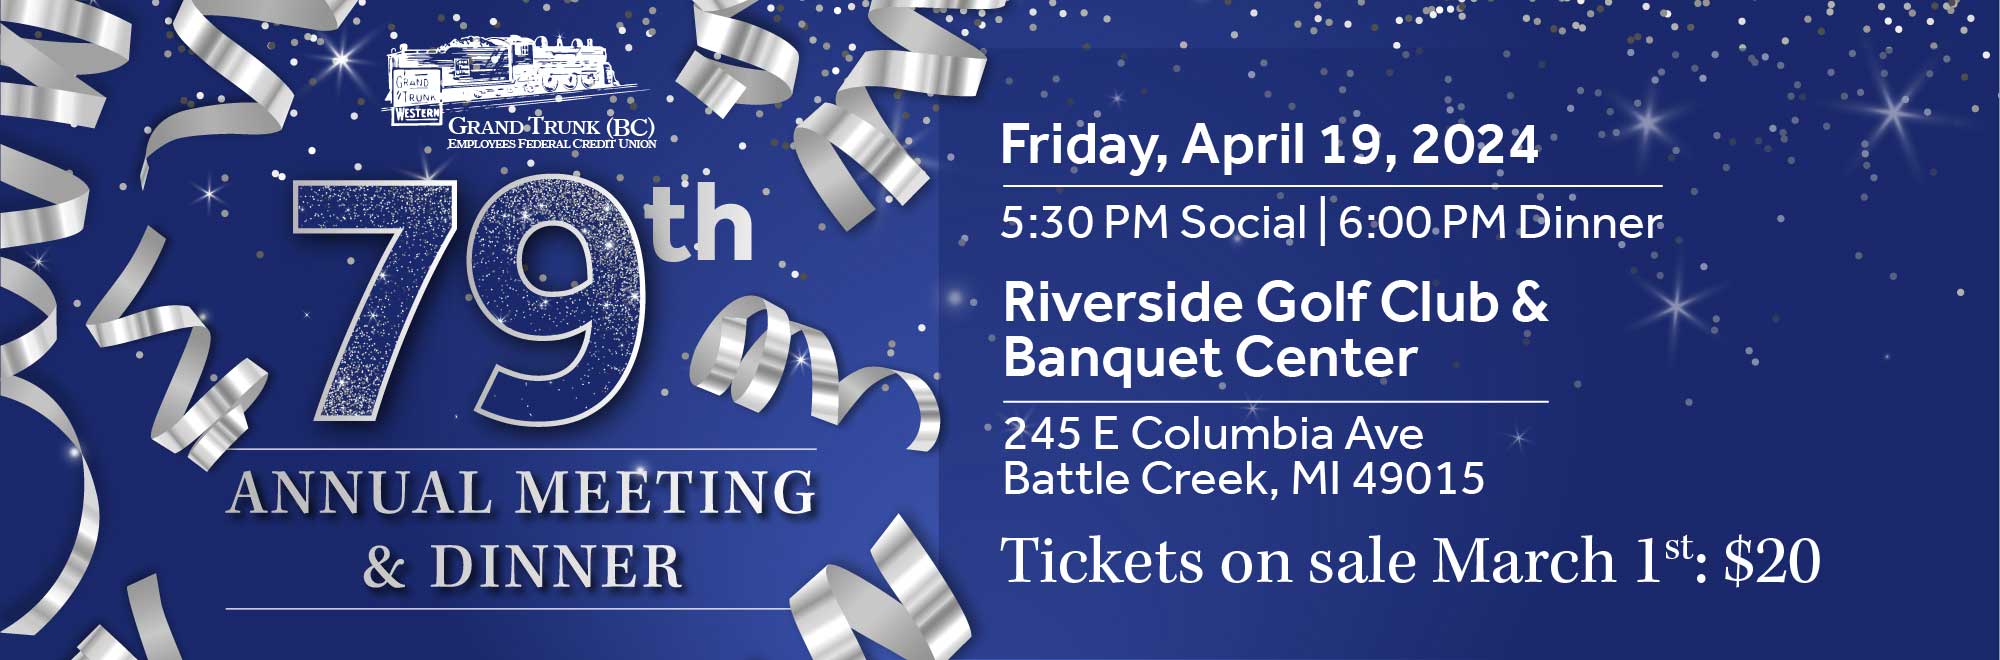 79th Annual Meeting and Dinner Friday April 19, 2024 at Riverside Golf Club and banquet center. 5:30pm social. 6:00pm dinner. Tickets on sale March 01 for $20.